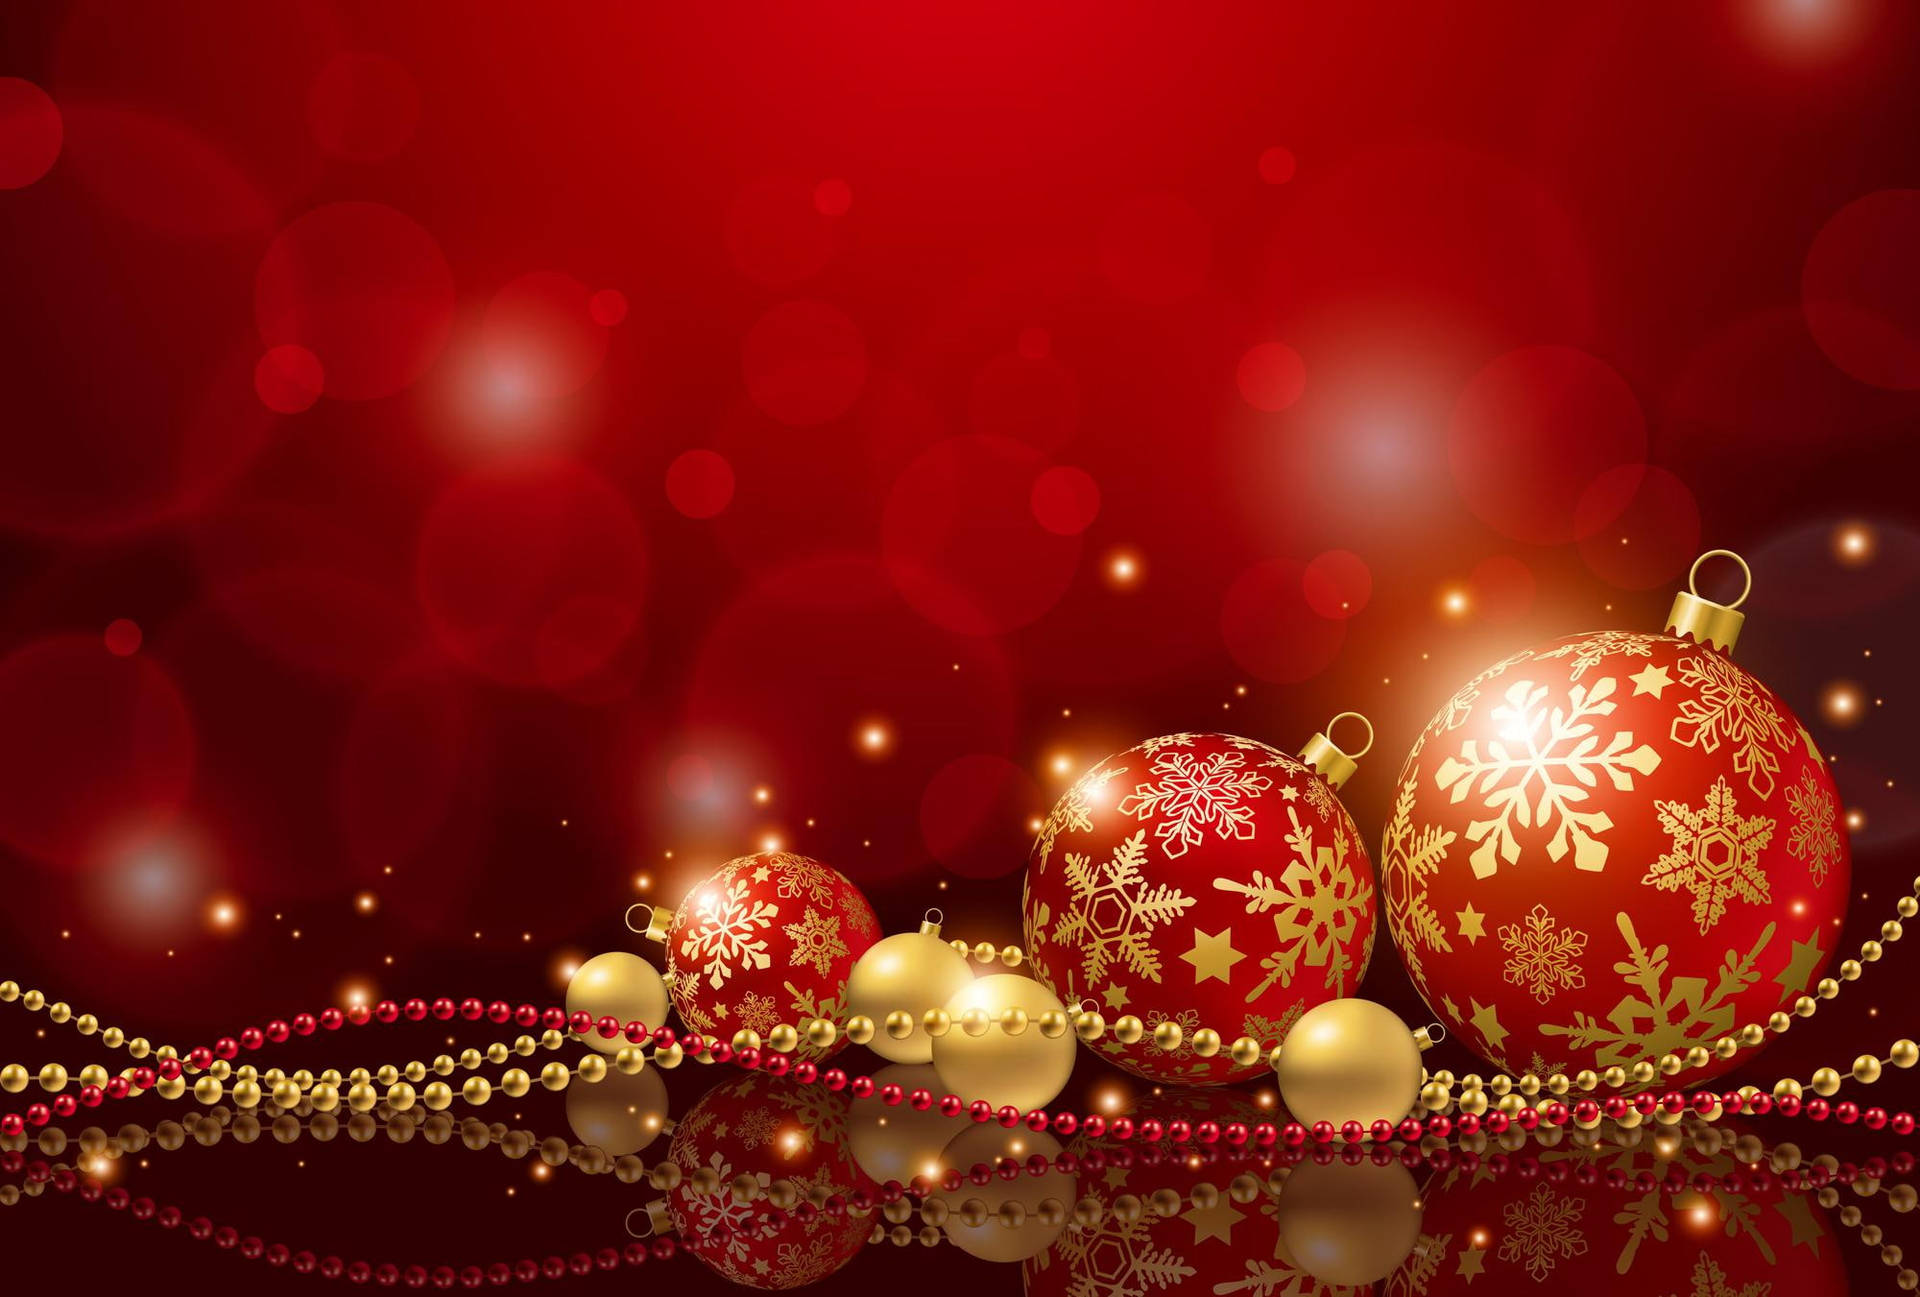 Gleaming Red Christmas Balls Hanging at Event Wallpaper